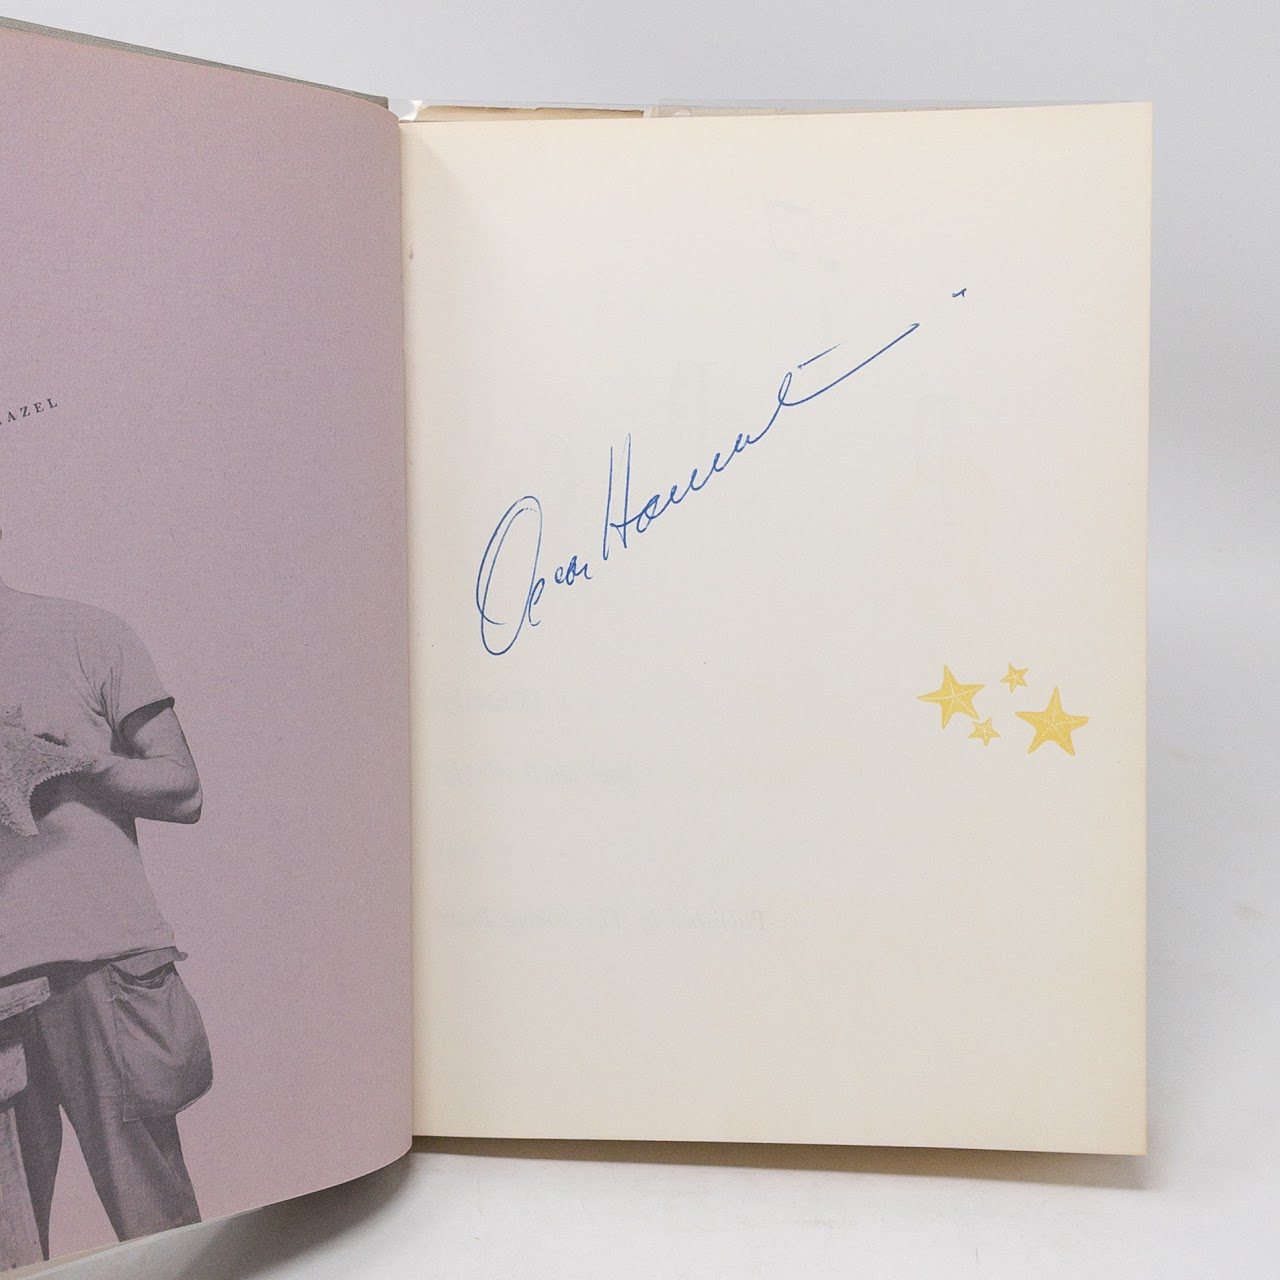 Oscar Hammerstein: Pipe Dream Signed First Edition Book